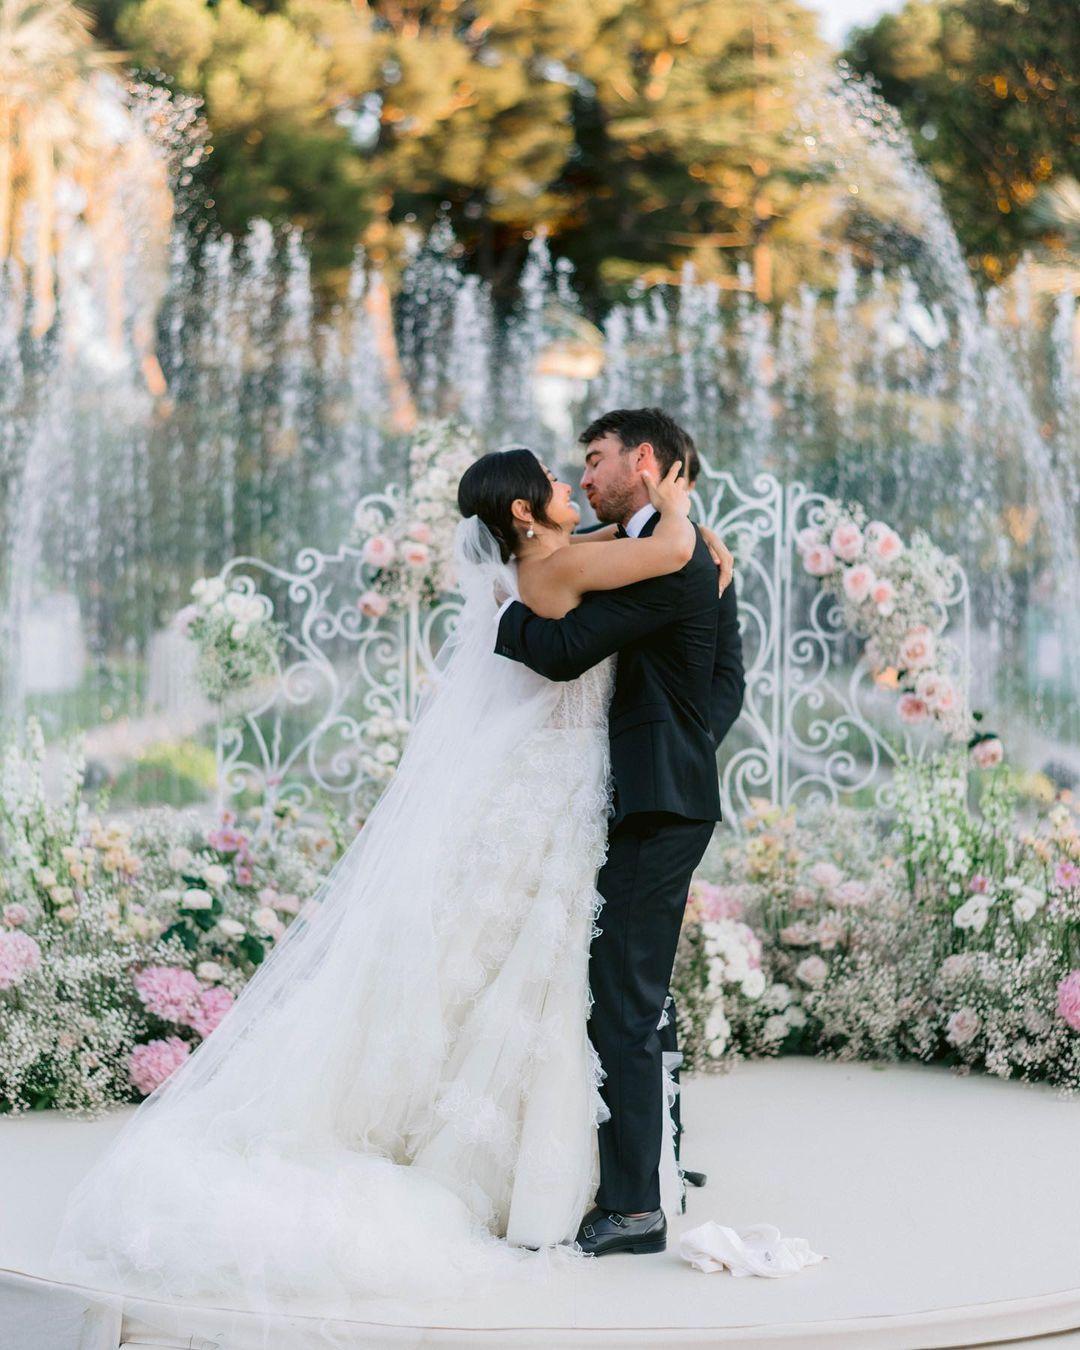 class="content__text"
 Time to say I do for @liv_arella and Nick last August at @villaephrussi captured by @gregfinck and @mgimage, along with a great team @missrose_by_perrine @amandinebmakeup @thomasdusseune @incantomusique @latinidesign @oscardelarenta @dx_events 
 